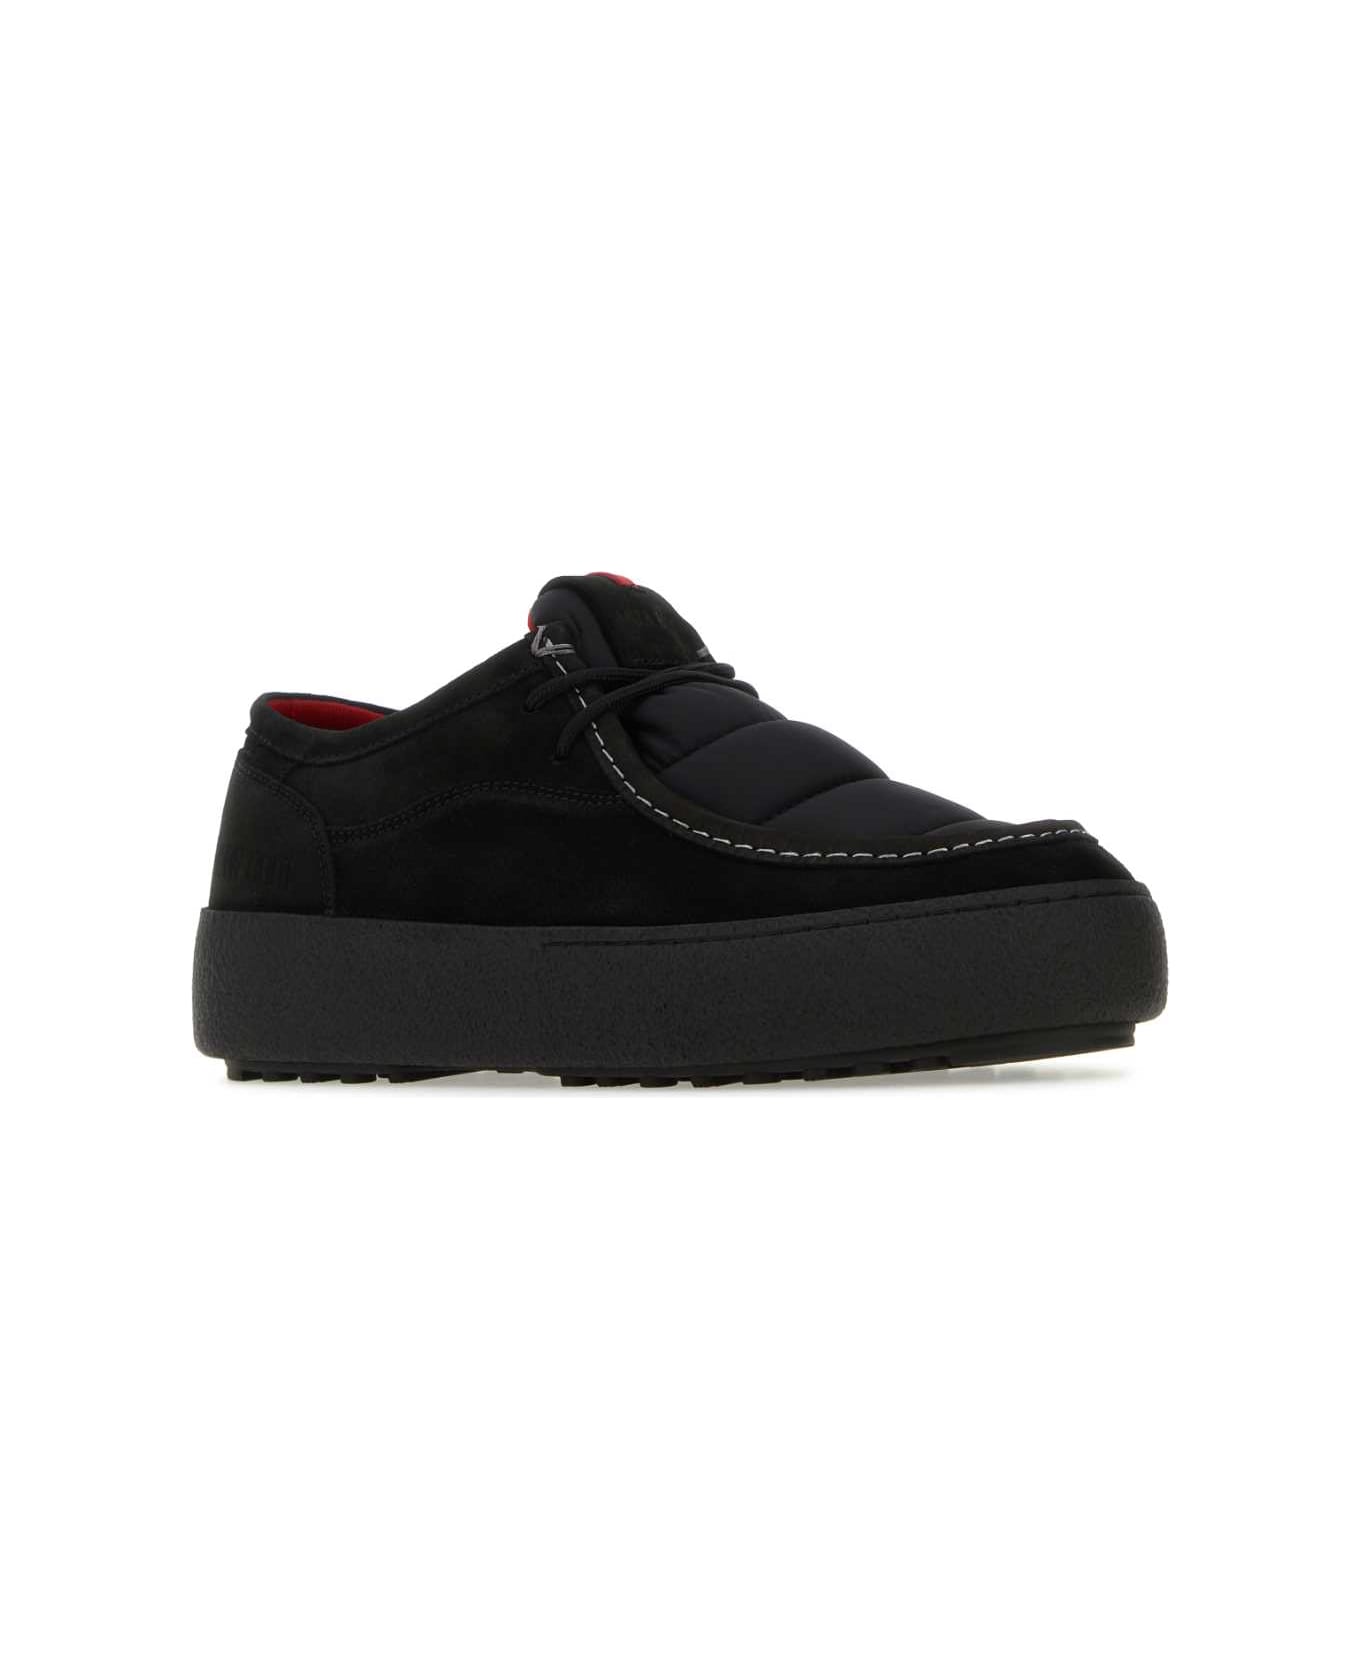 Moon Boot Black Suede And Nylon Mtrack Low Ankle Boots - Black